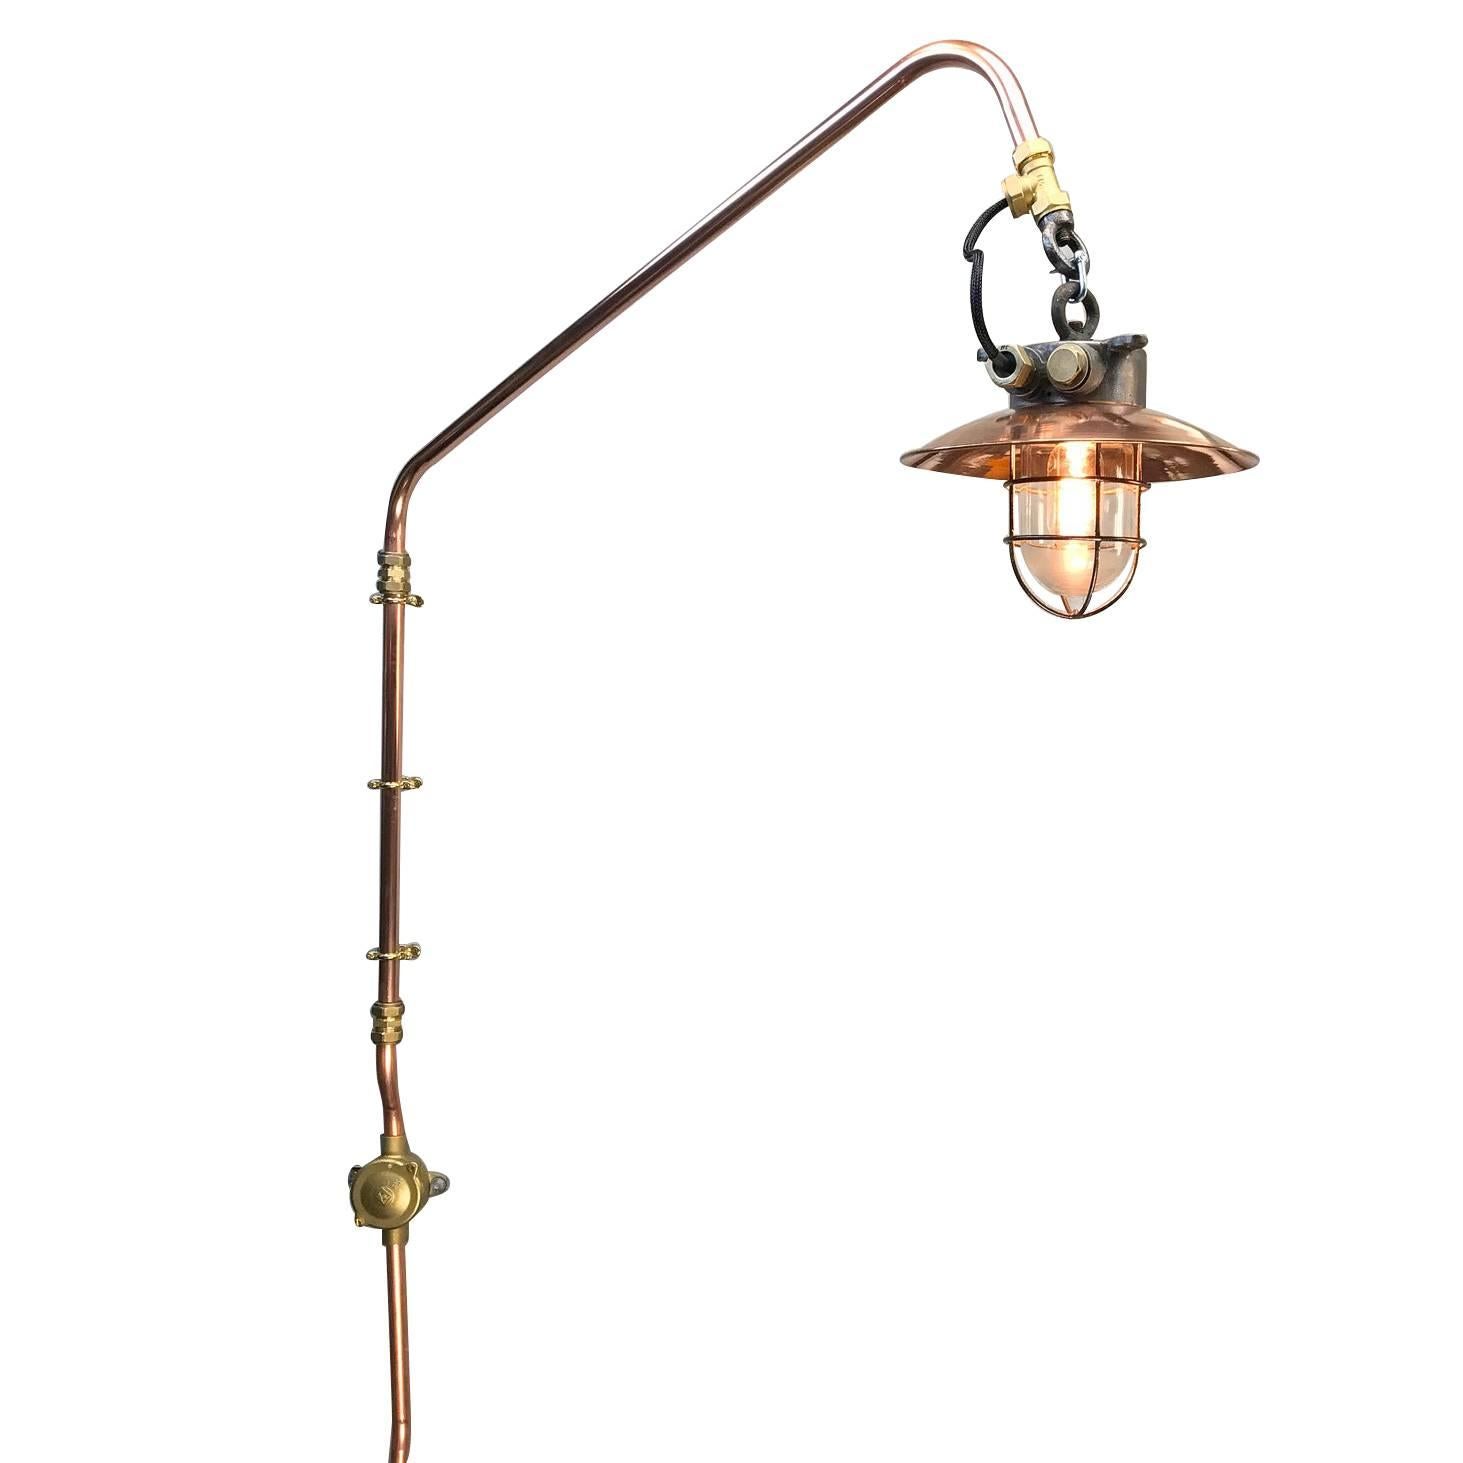 1970s Japanese Copper & Iron Cantilever Wall Light with Brass Fittings & Cage